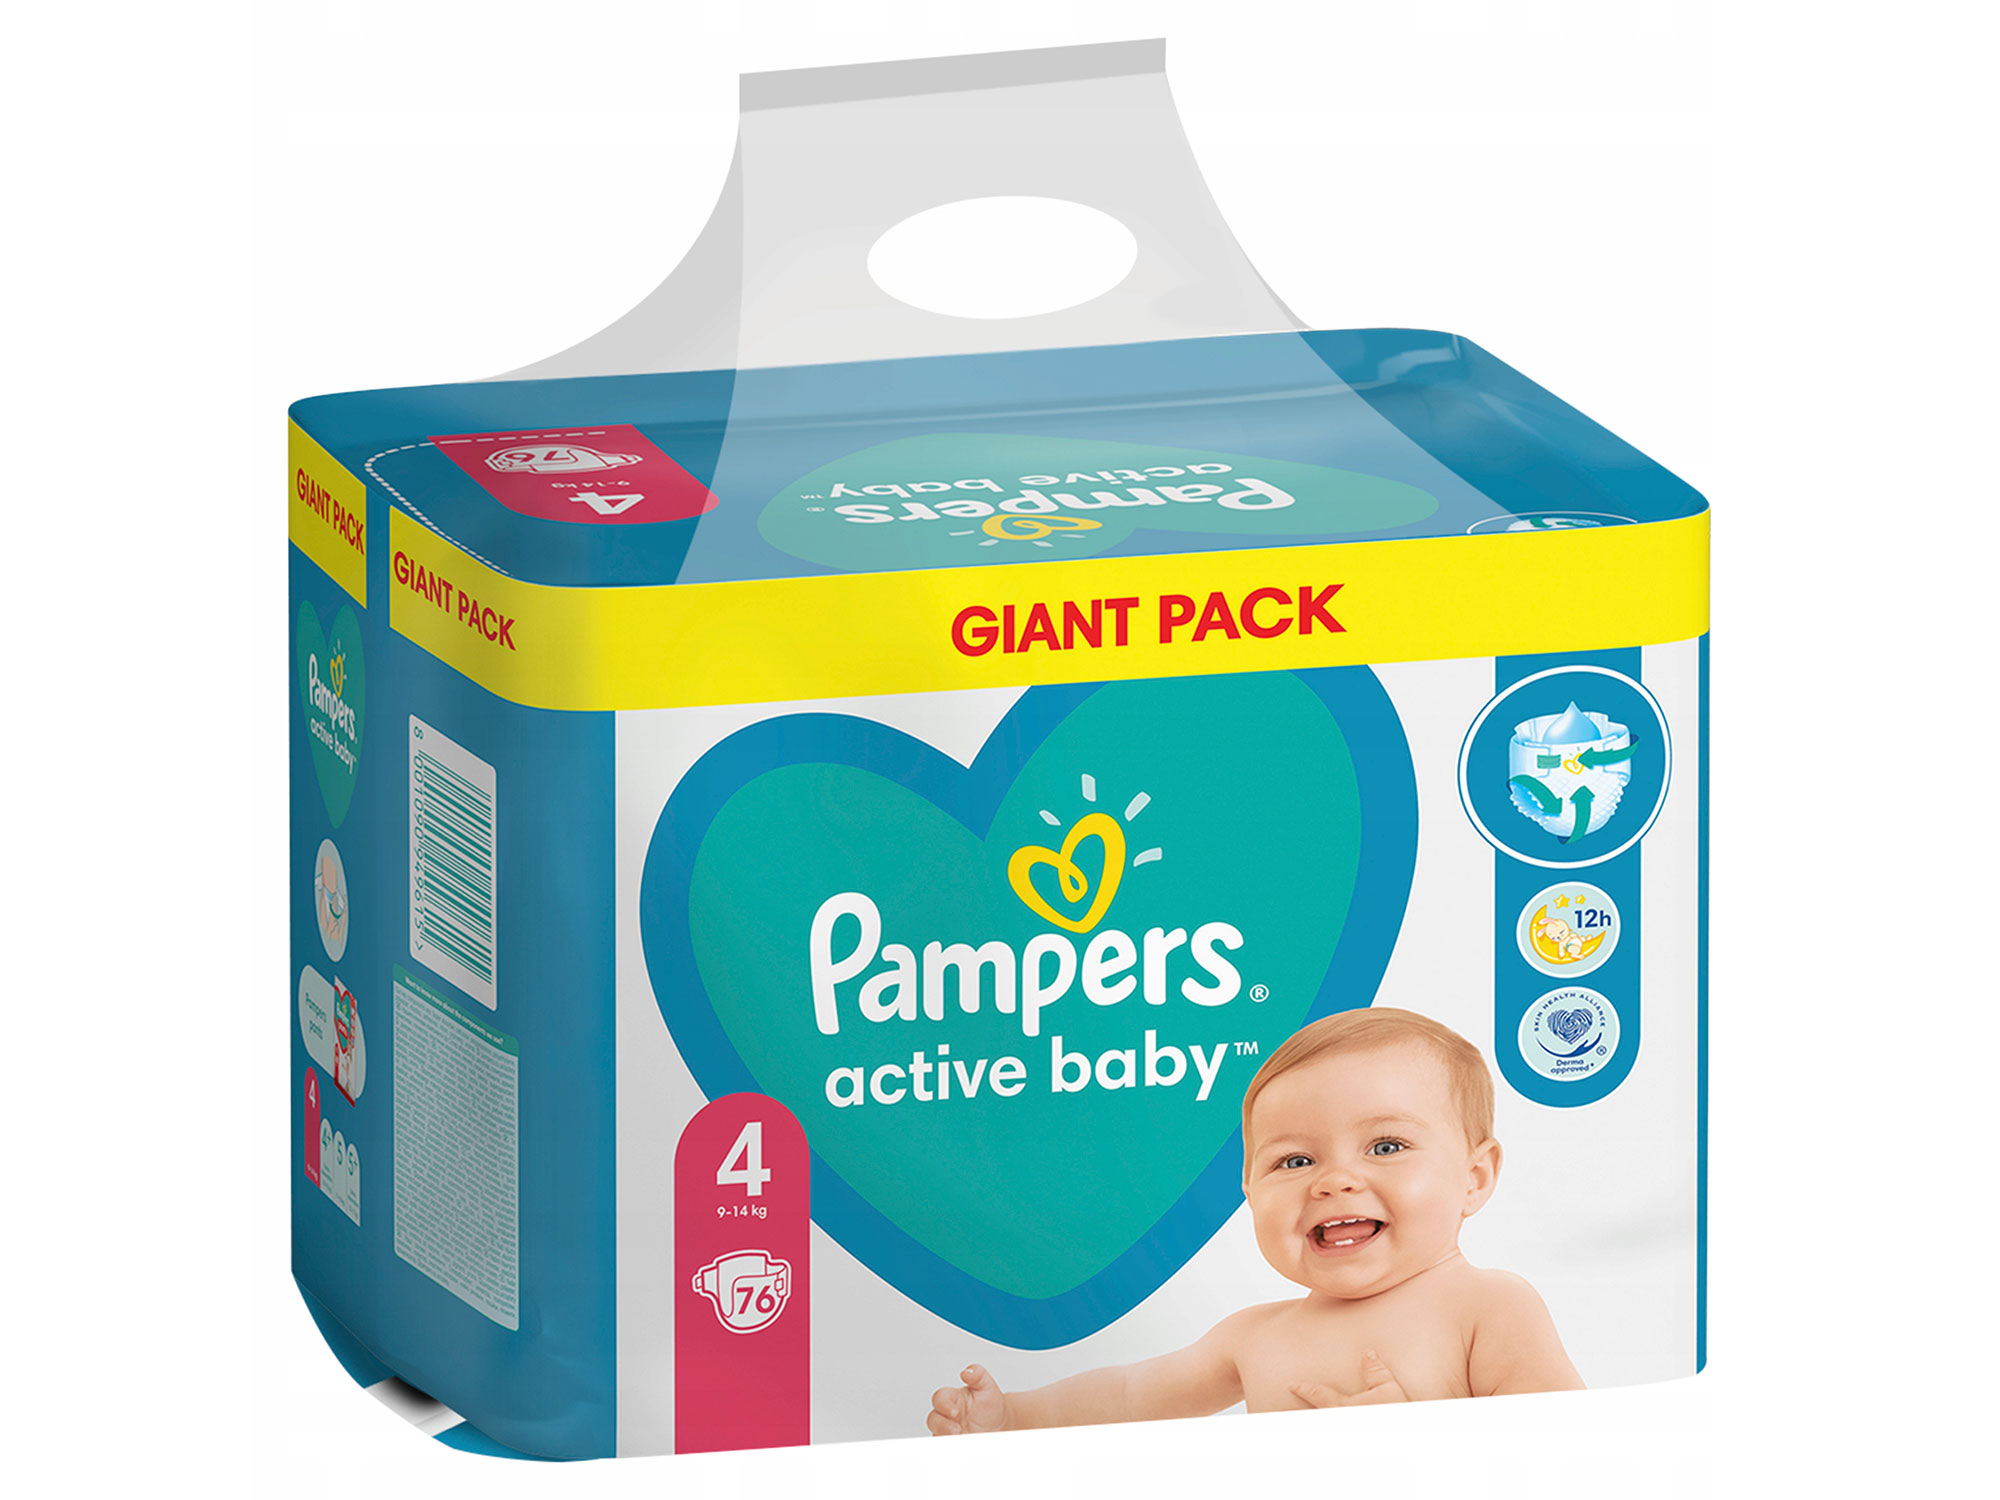 pampers semi 5